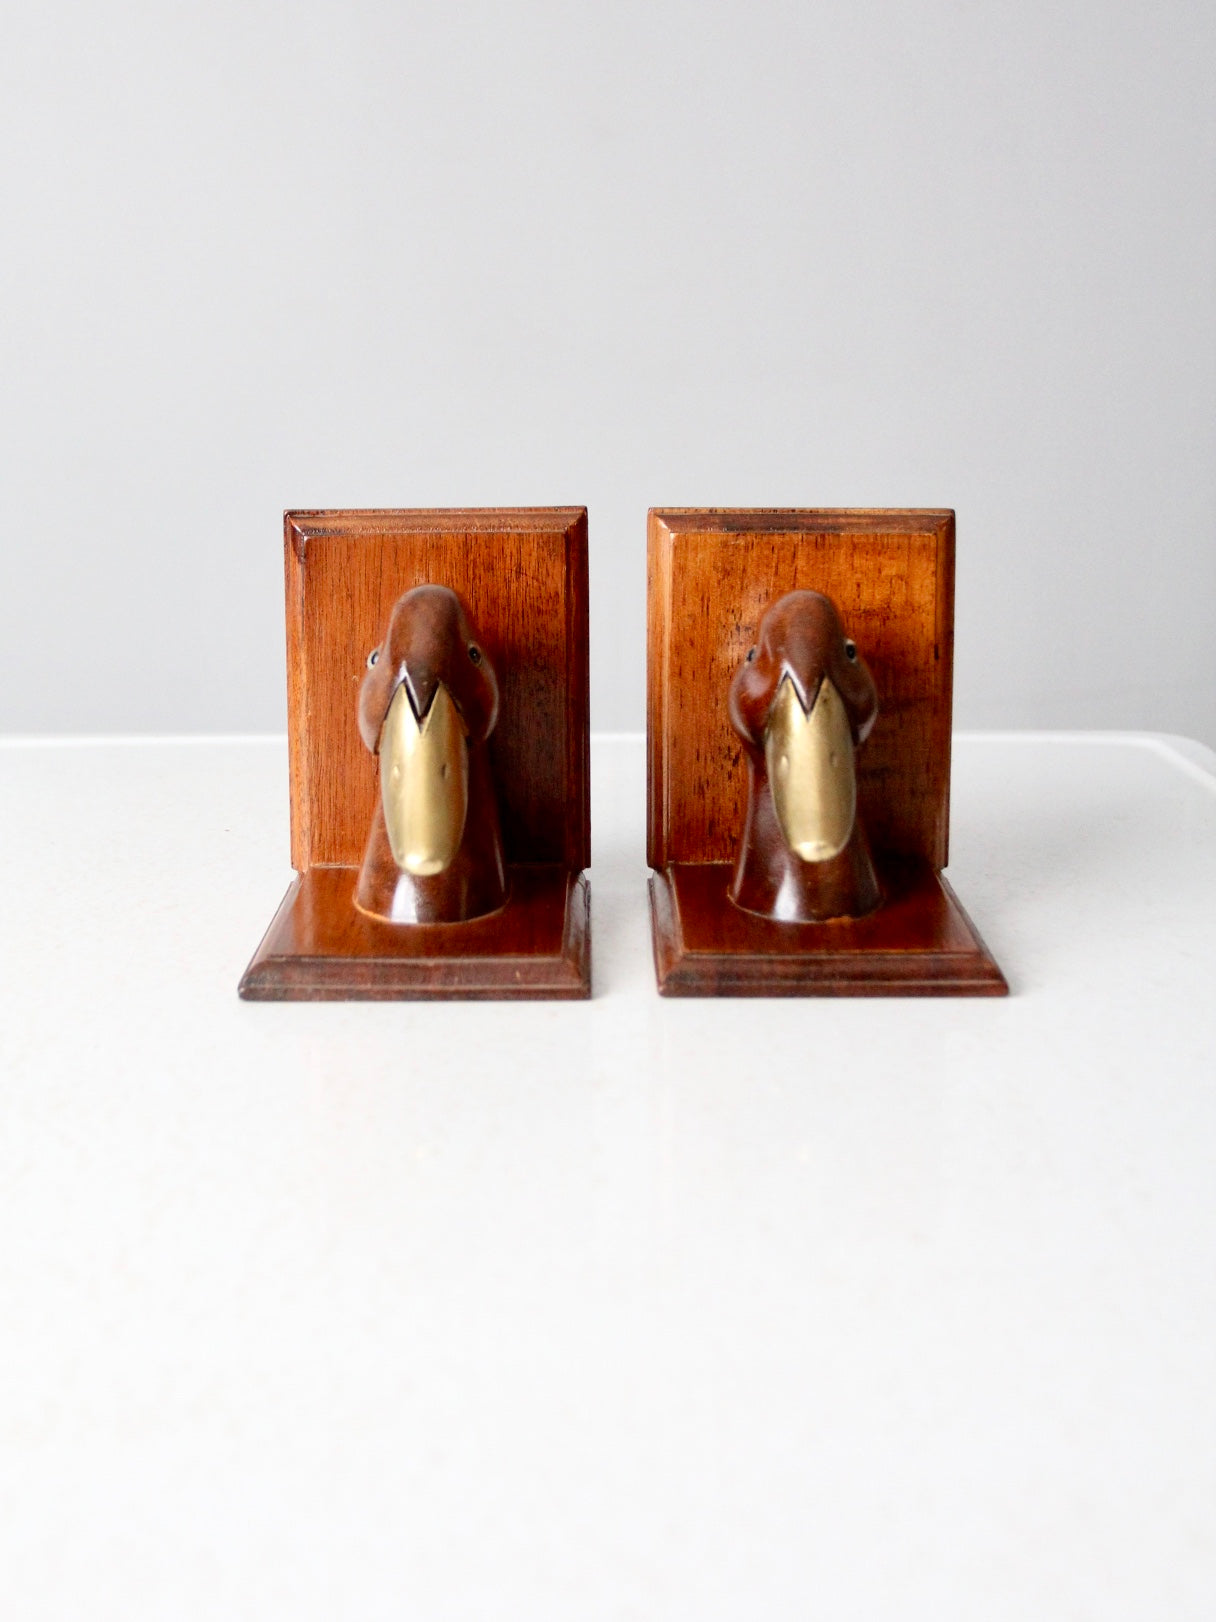 vintage duck bookends